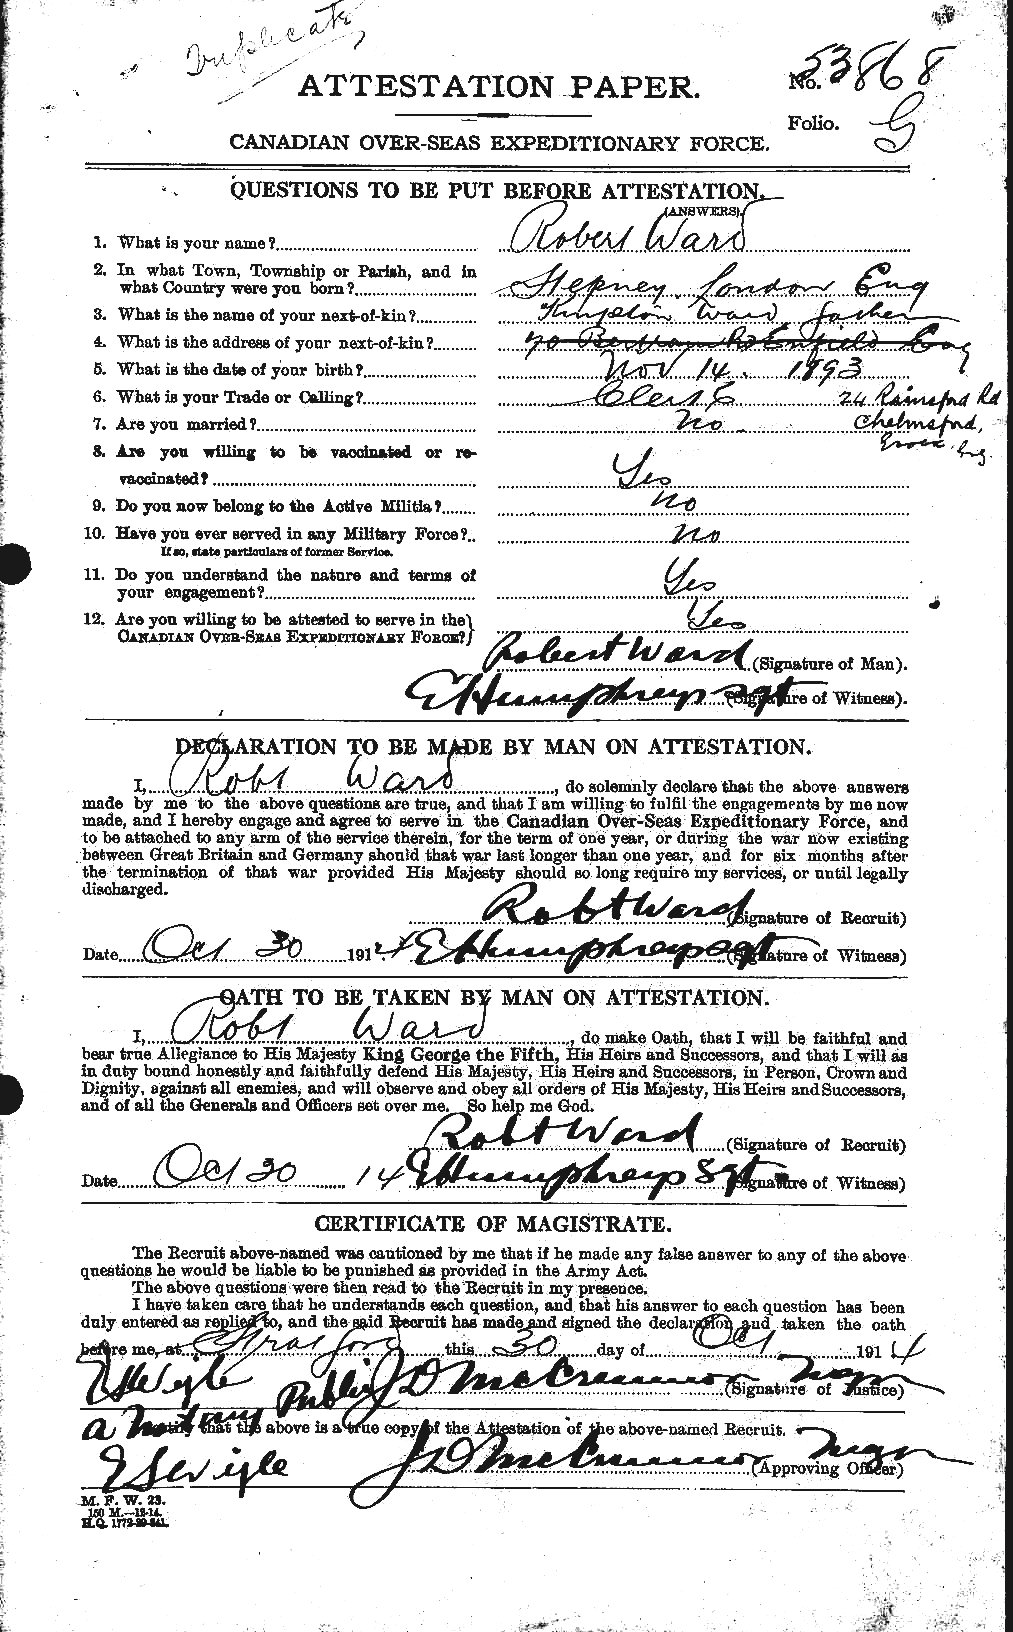 Personnel Records of the First World War - CEF 659663a